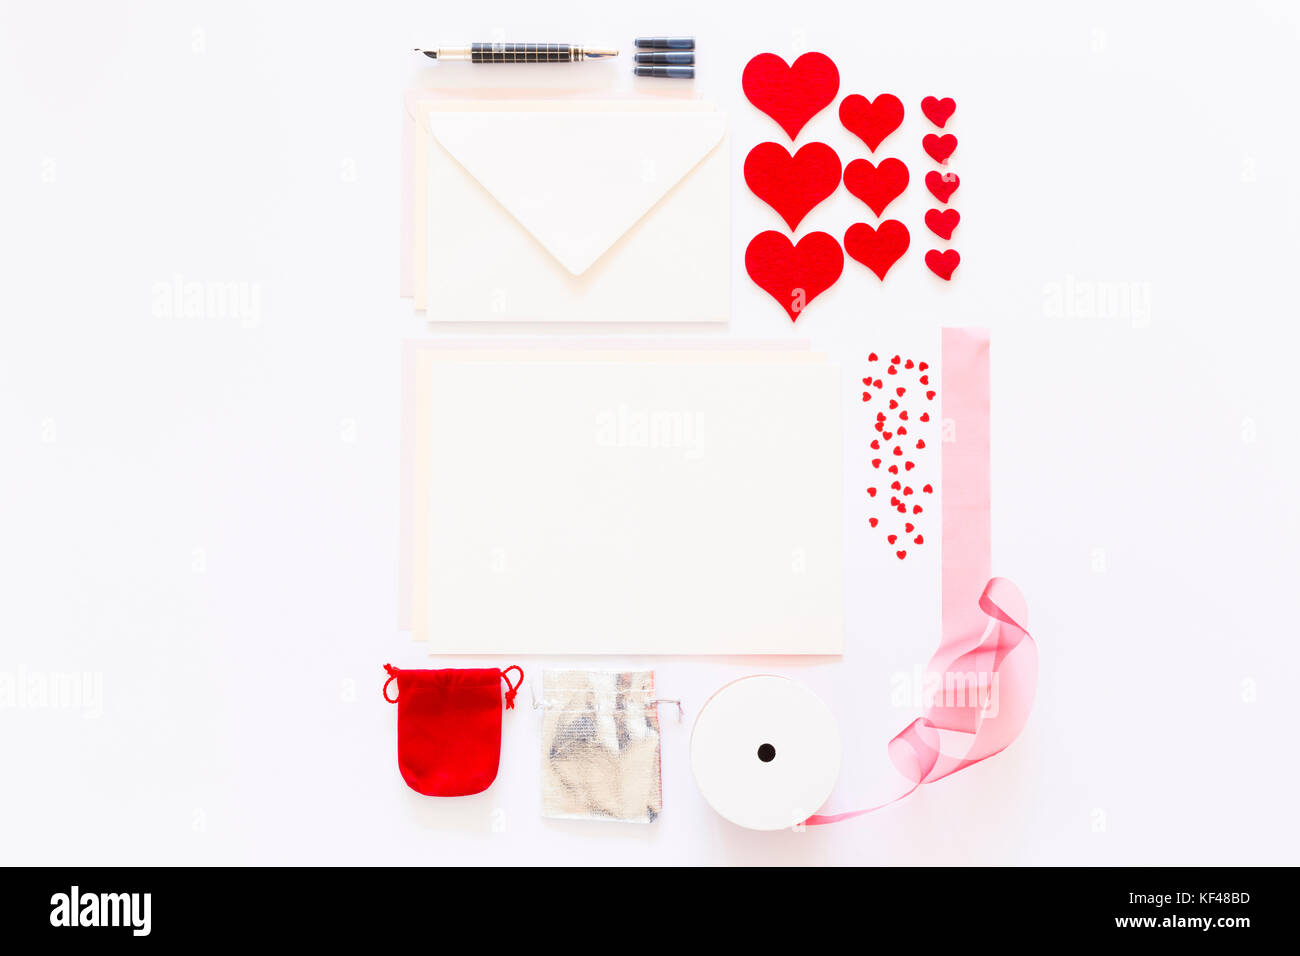 Display of love letter items on white background. Assortment of cards, envelopes, hearts, ribbon and ink pen. Stock Photo